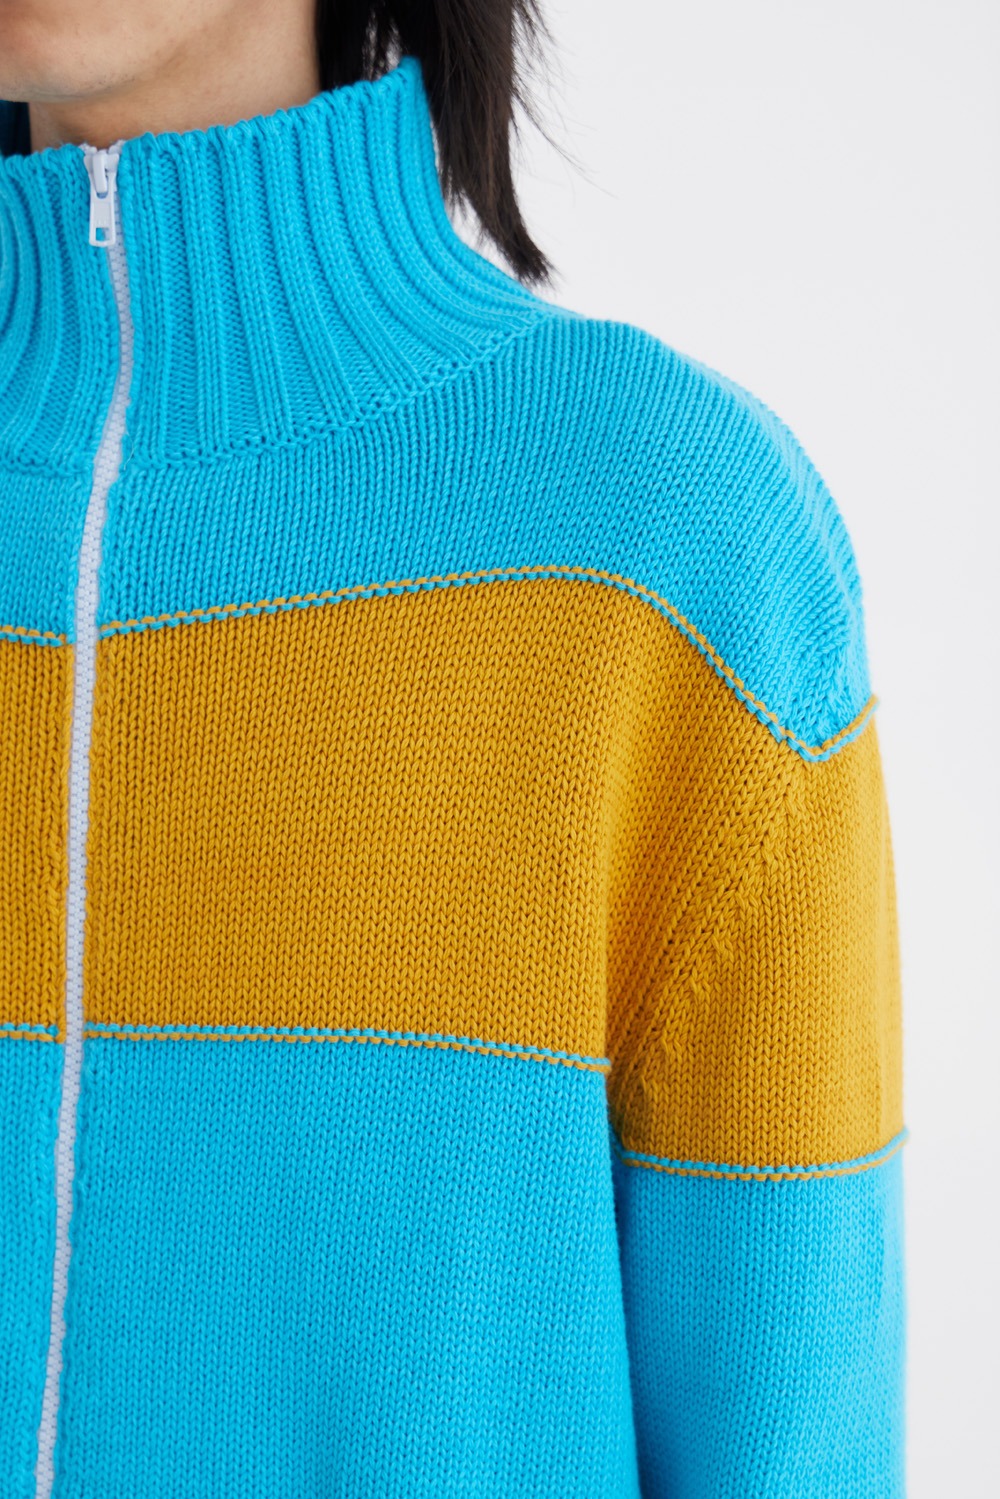 Knit Track Jacket-Turquoise Blue/Curry